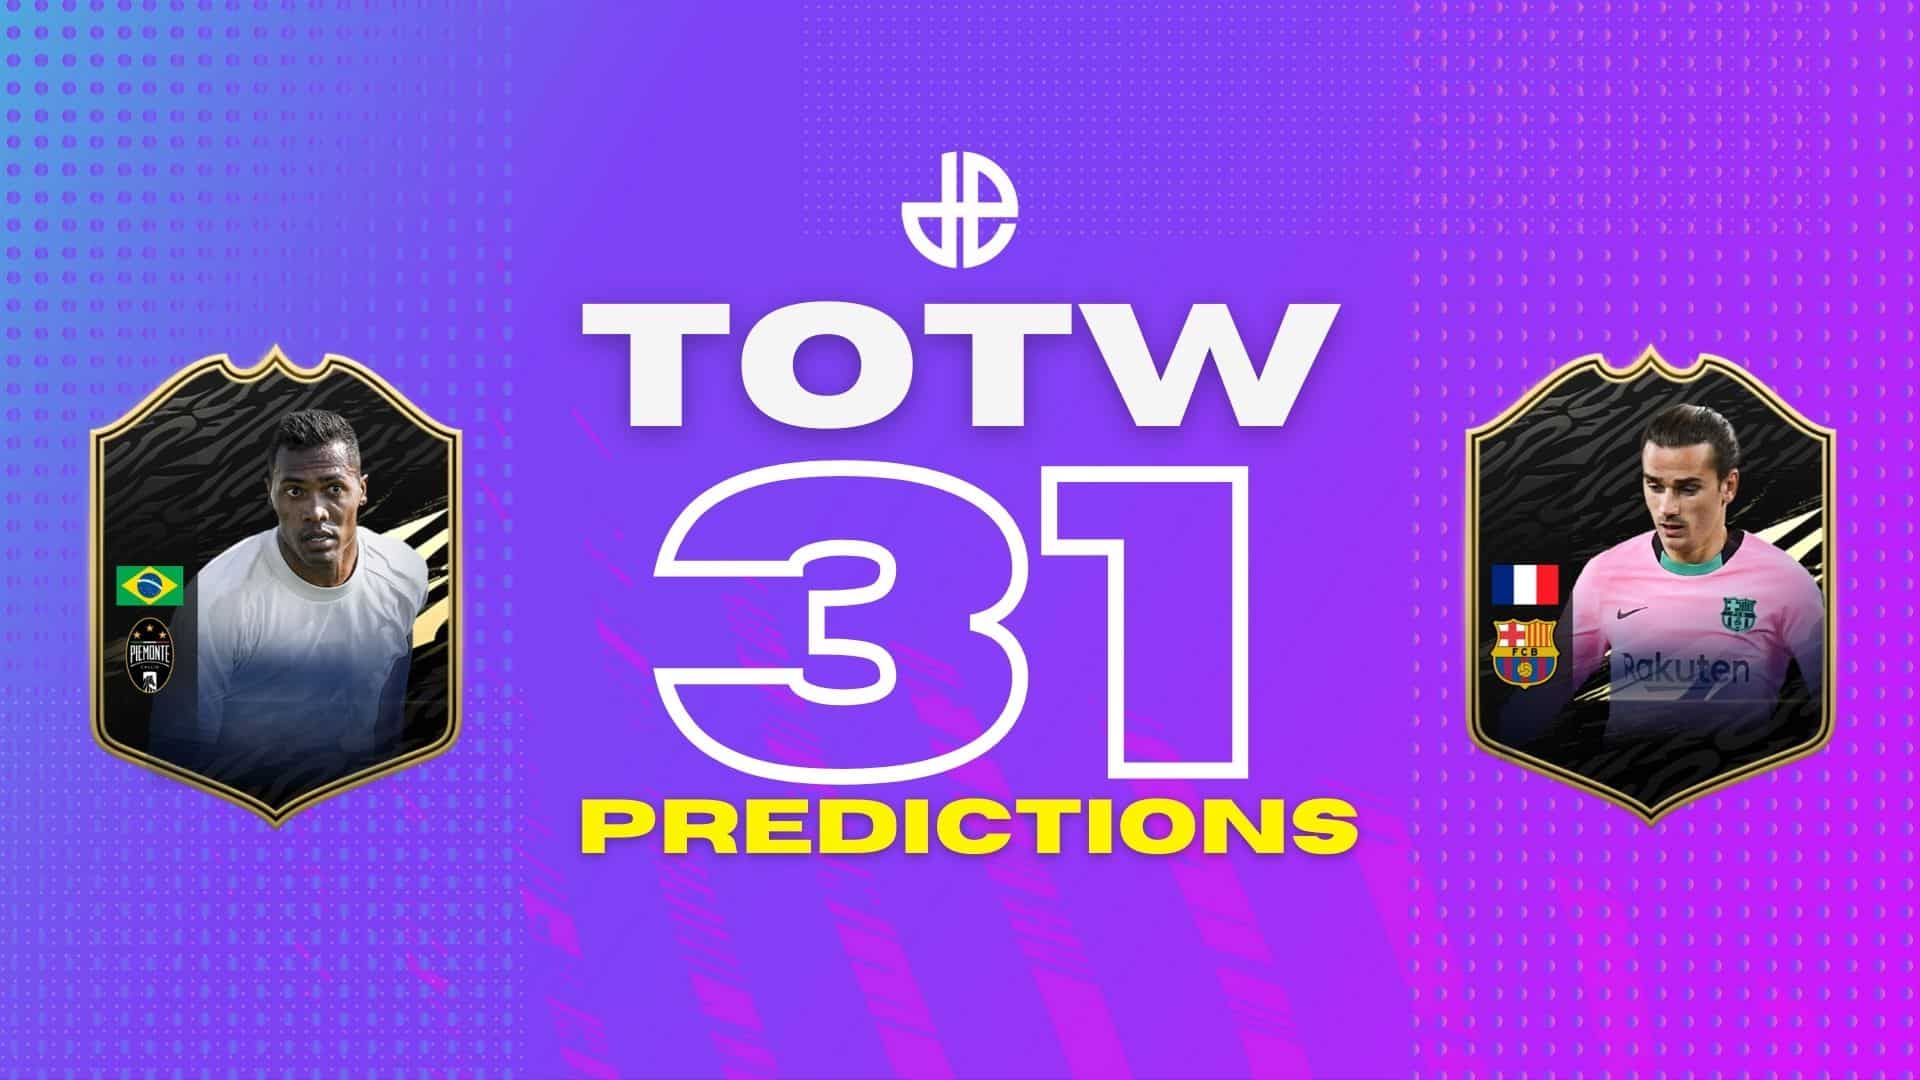 FIFa 21 TOTW 31 predictions with cards